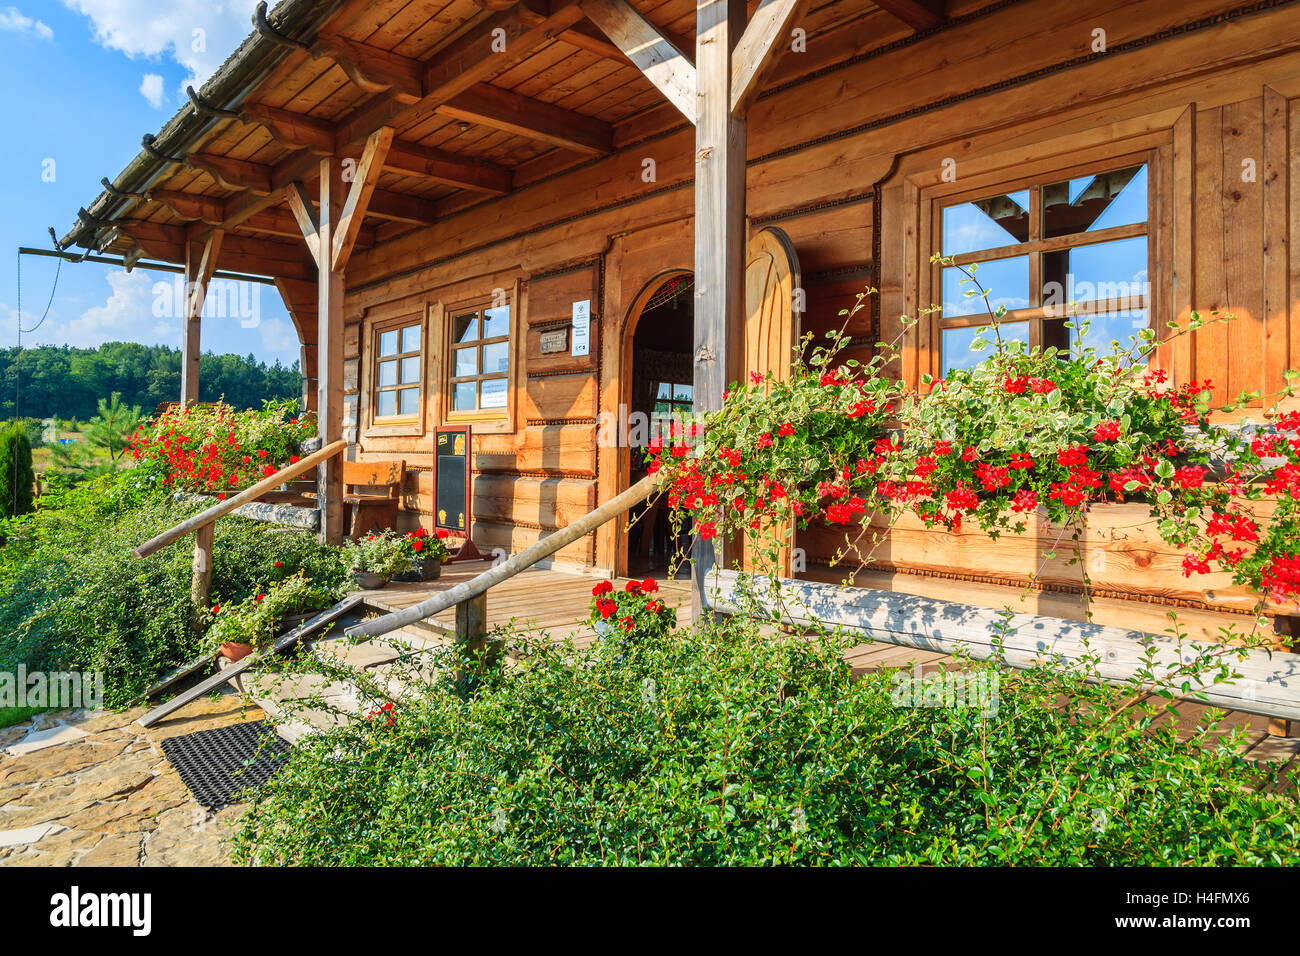 VILLAGE NEAR KRAKOW, POLAND - AUG 9, 2014: front view of traditional restaurant building on sunny summer day. Mountain style architecture is very popular in south of Poland. Stock Photo